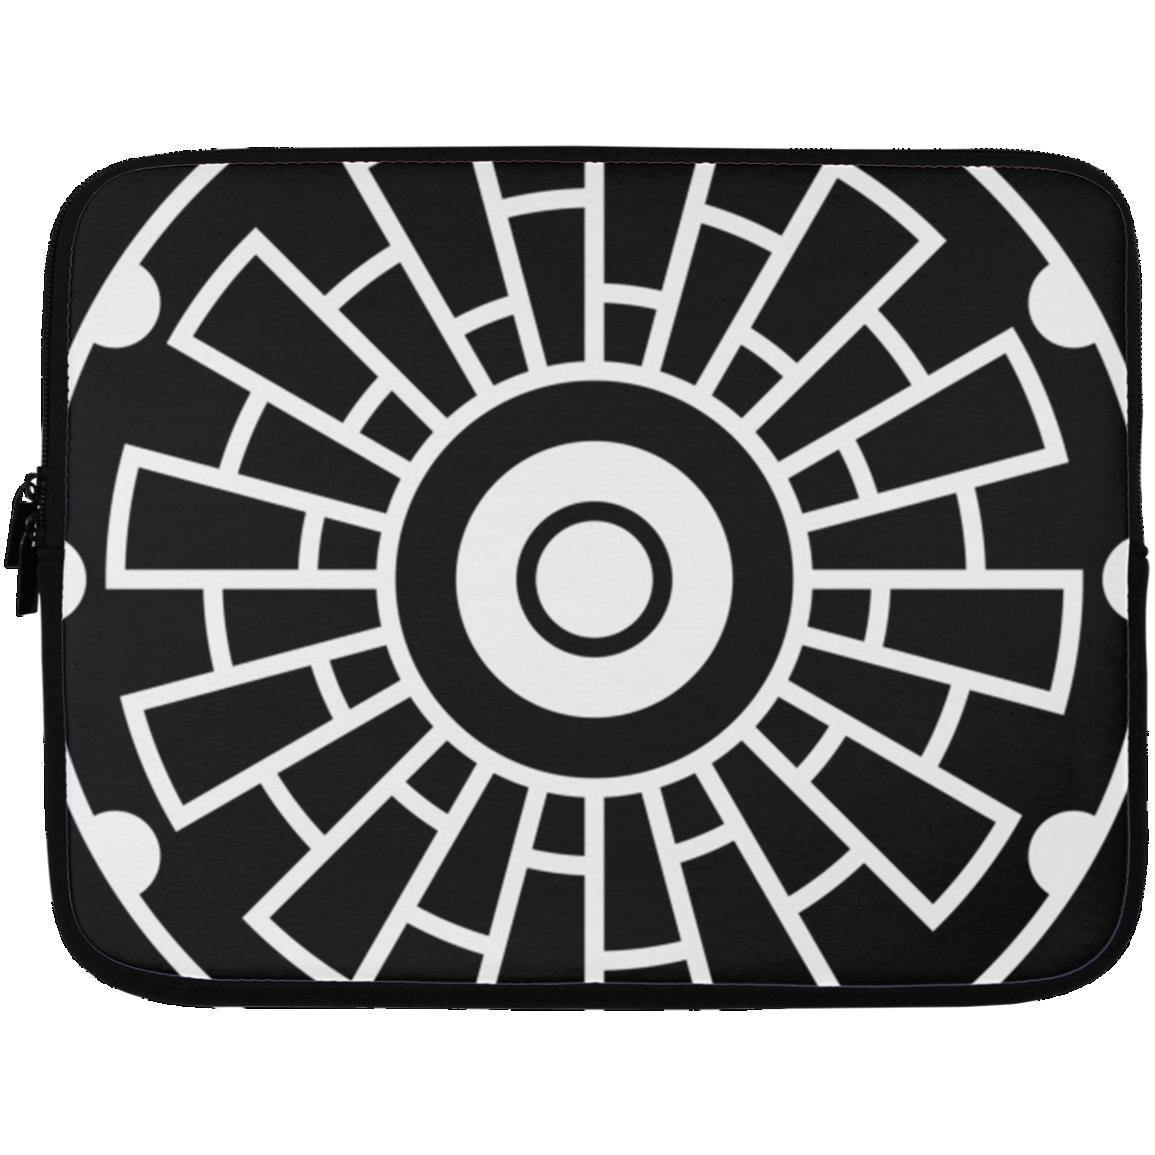 Crop Circle Laptop Sleeve - Sixpenny Handley - Shapes of Wisdom